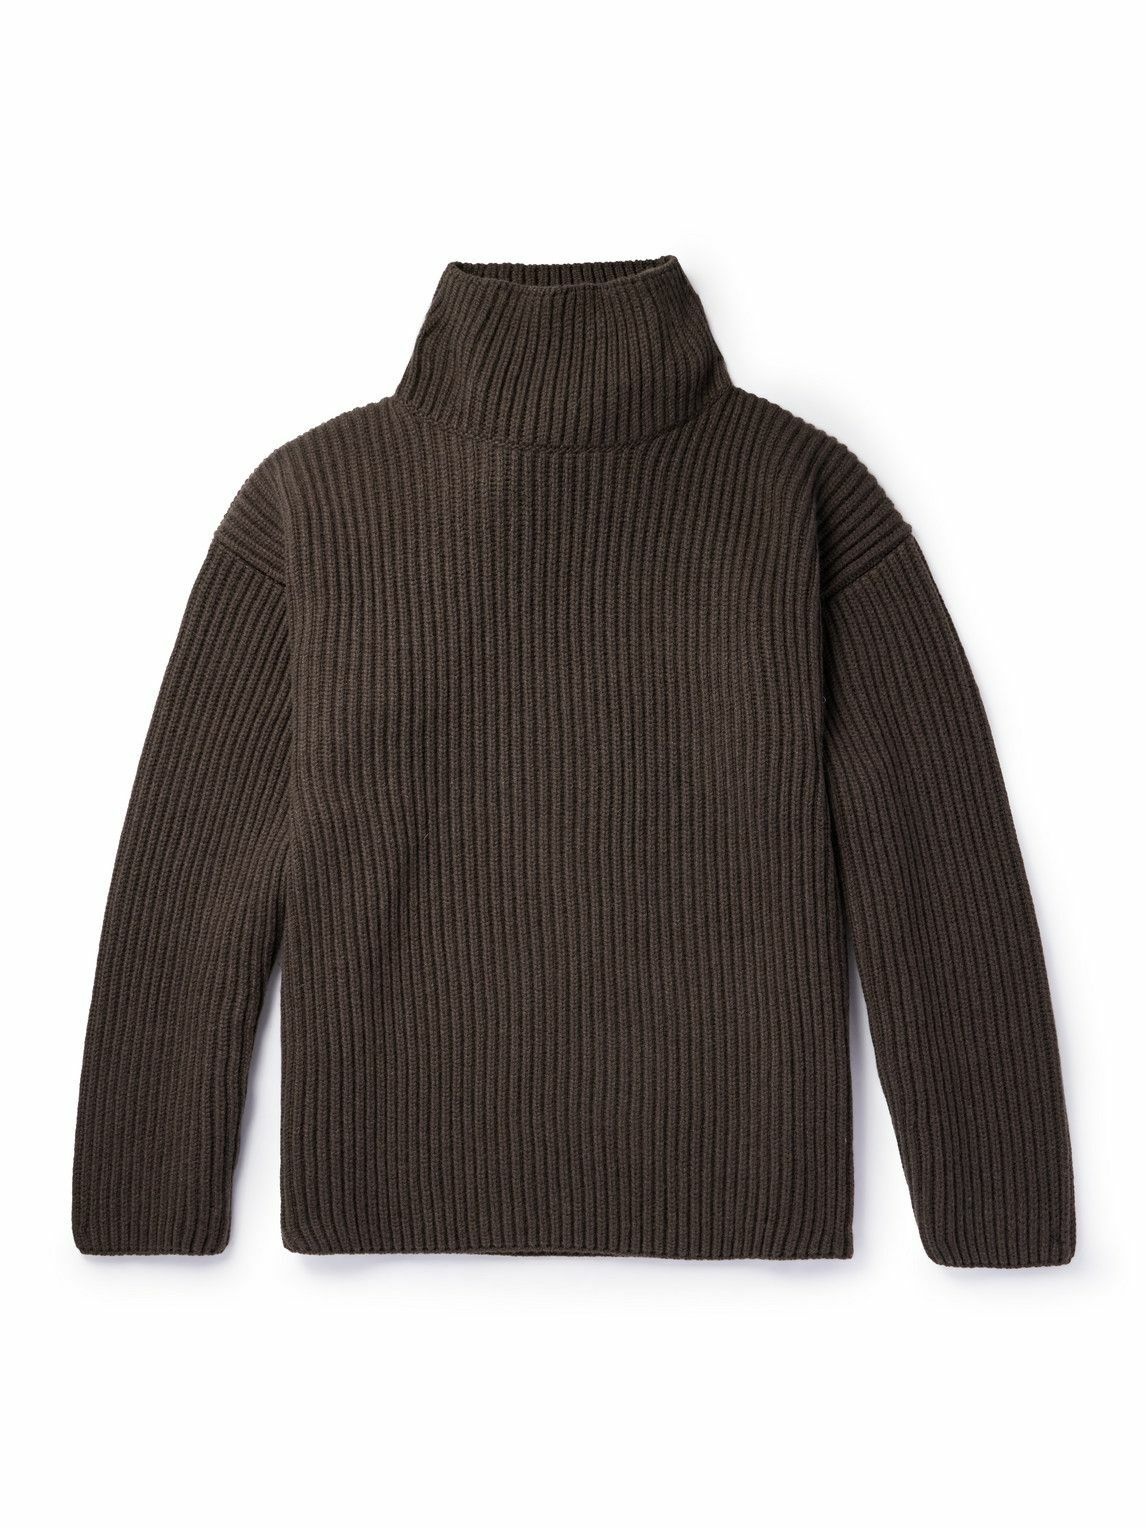 The Row - Manlio Ribbed Cashmere Rollneck Sweater - Brown The Row